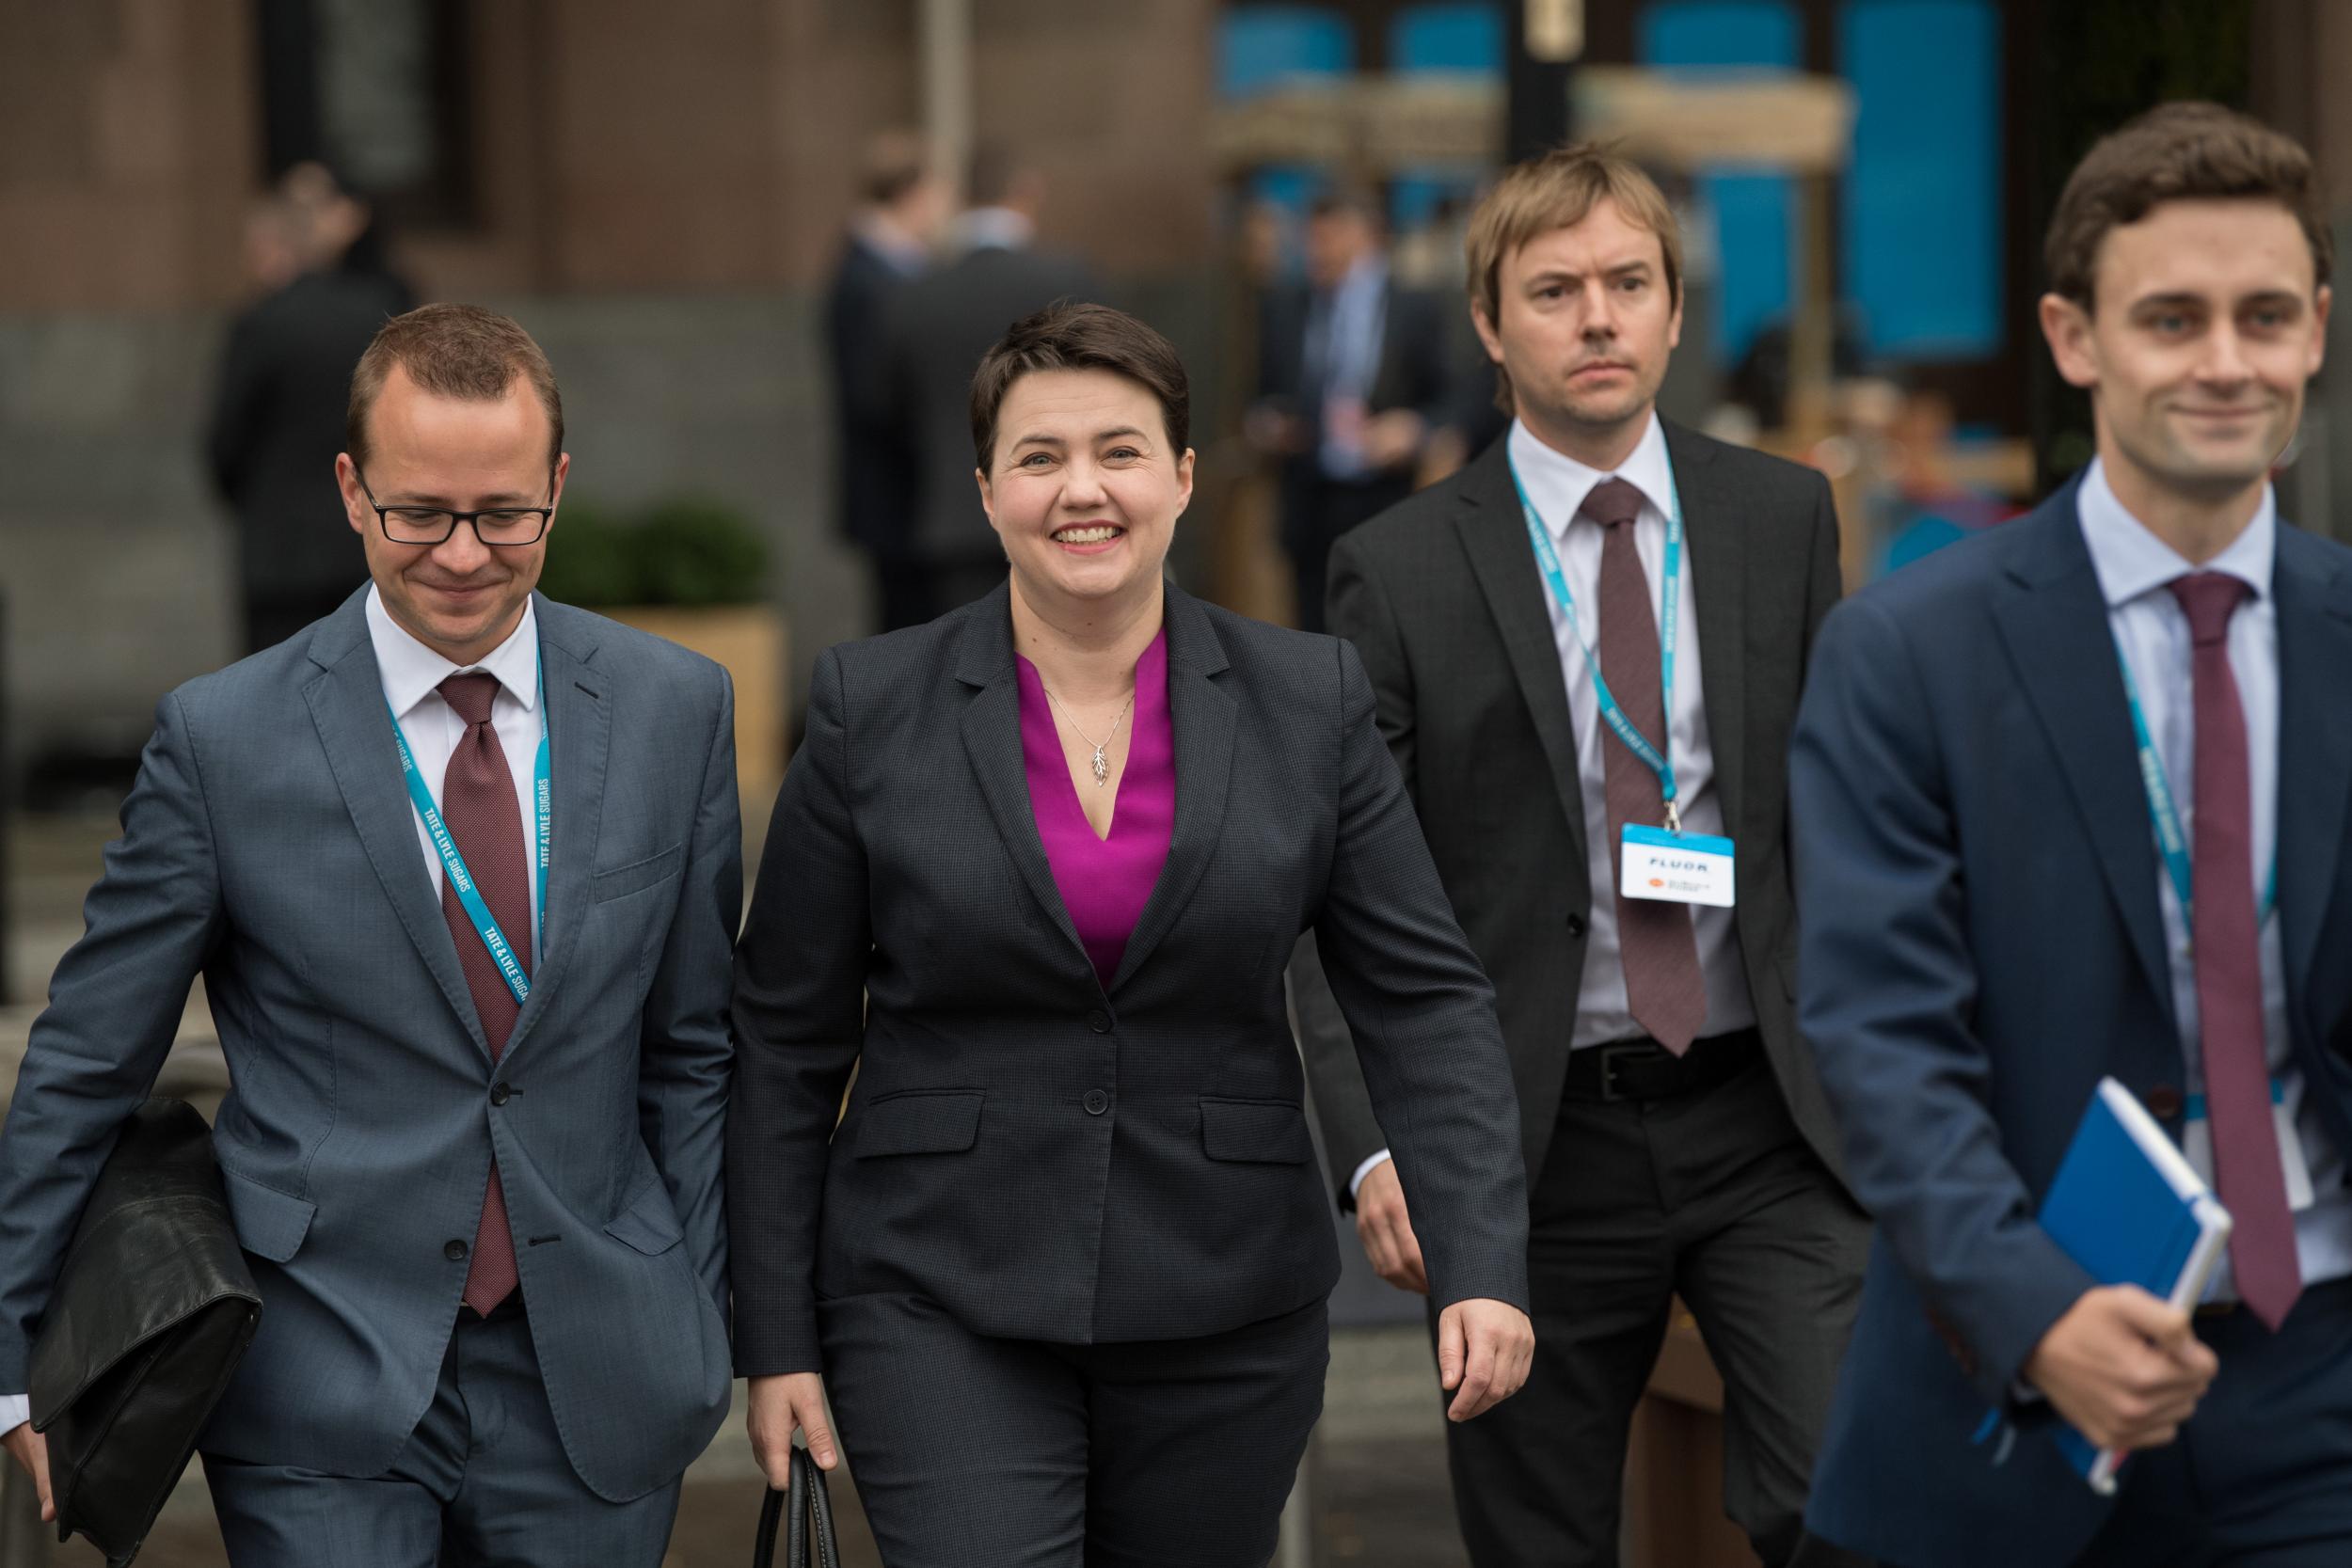 Scottish Tory leader Ruth Davidson says the party must change how it talks to young people